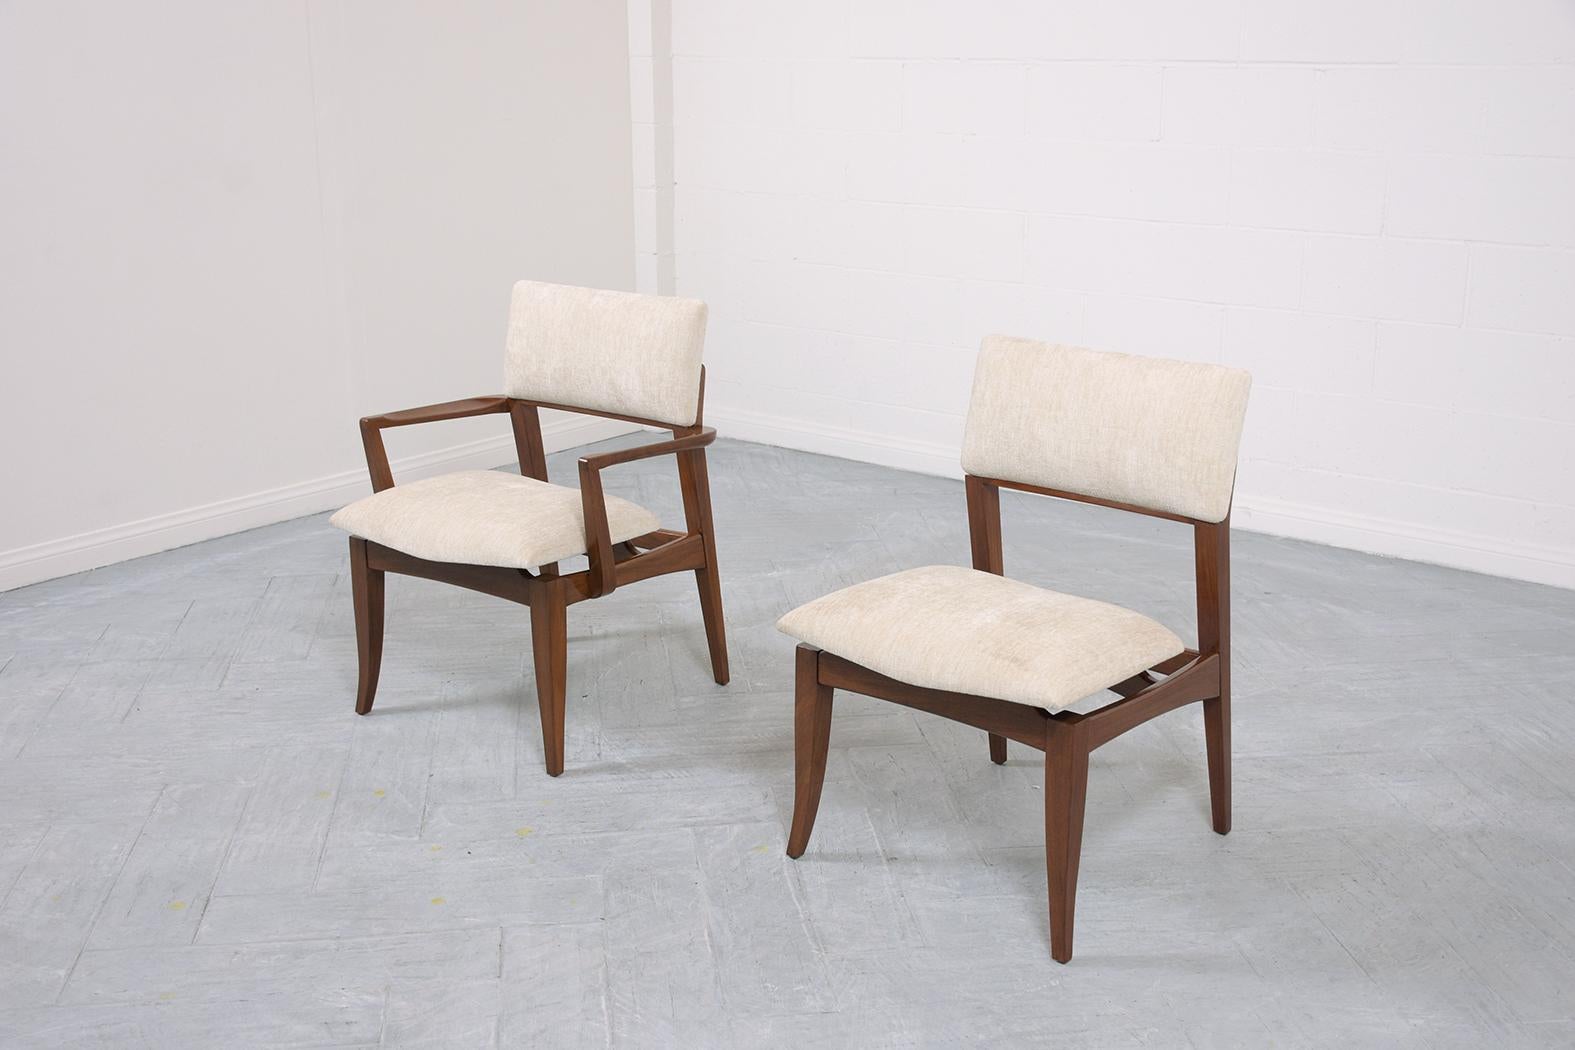 An extraordinary vintage set of eight mid-century modern dining chairs in excellent condition beautifully crafted out of walnut wood and has been professionally restored upholstery and upholstery by our expert craftsmen team. This set of vintage